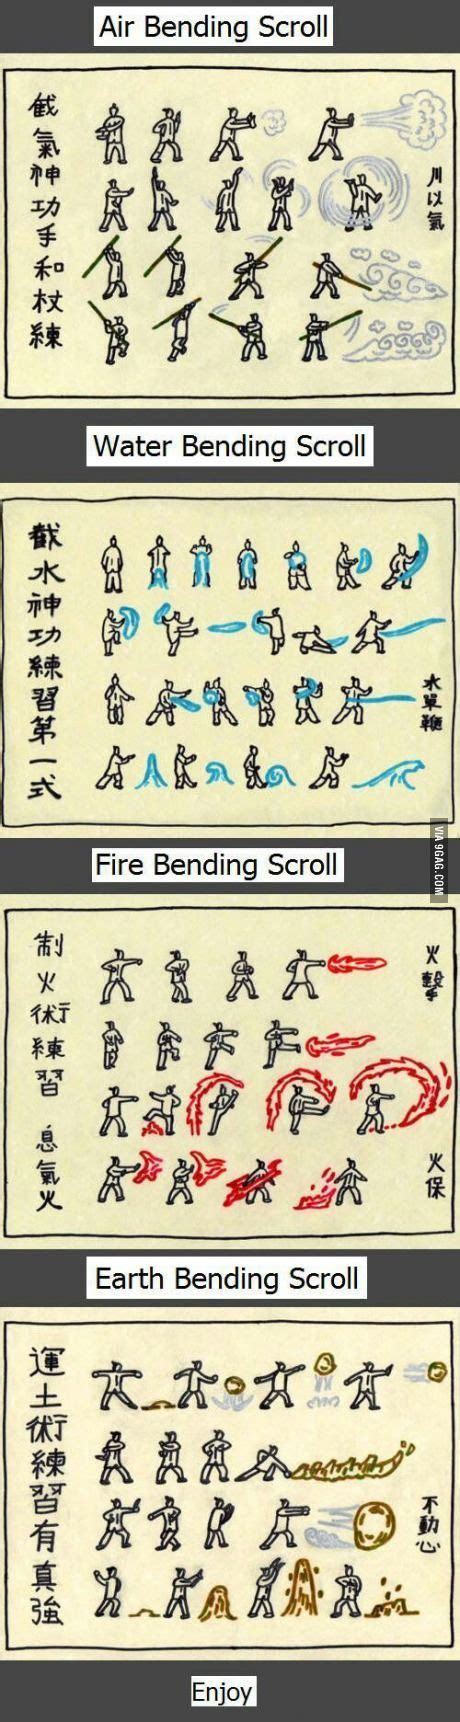 The Bending Scrolls Of All The Elements Enjoy Thelastairbender The Last Airbender Avatar